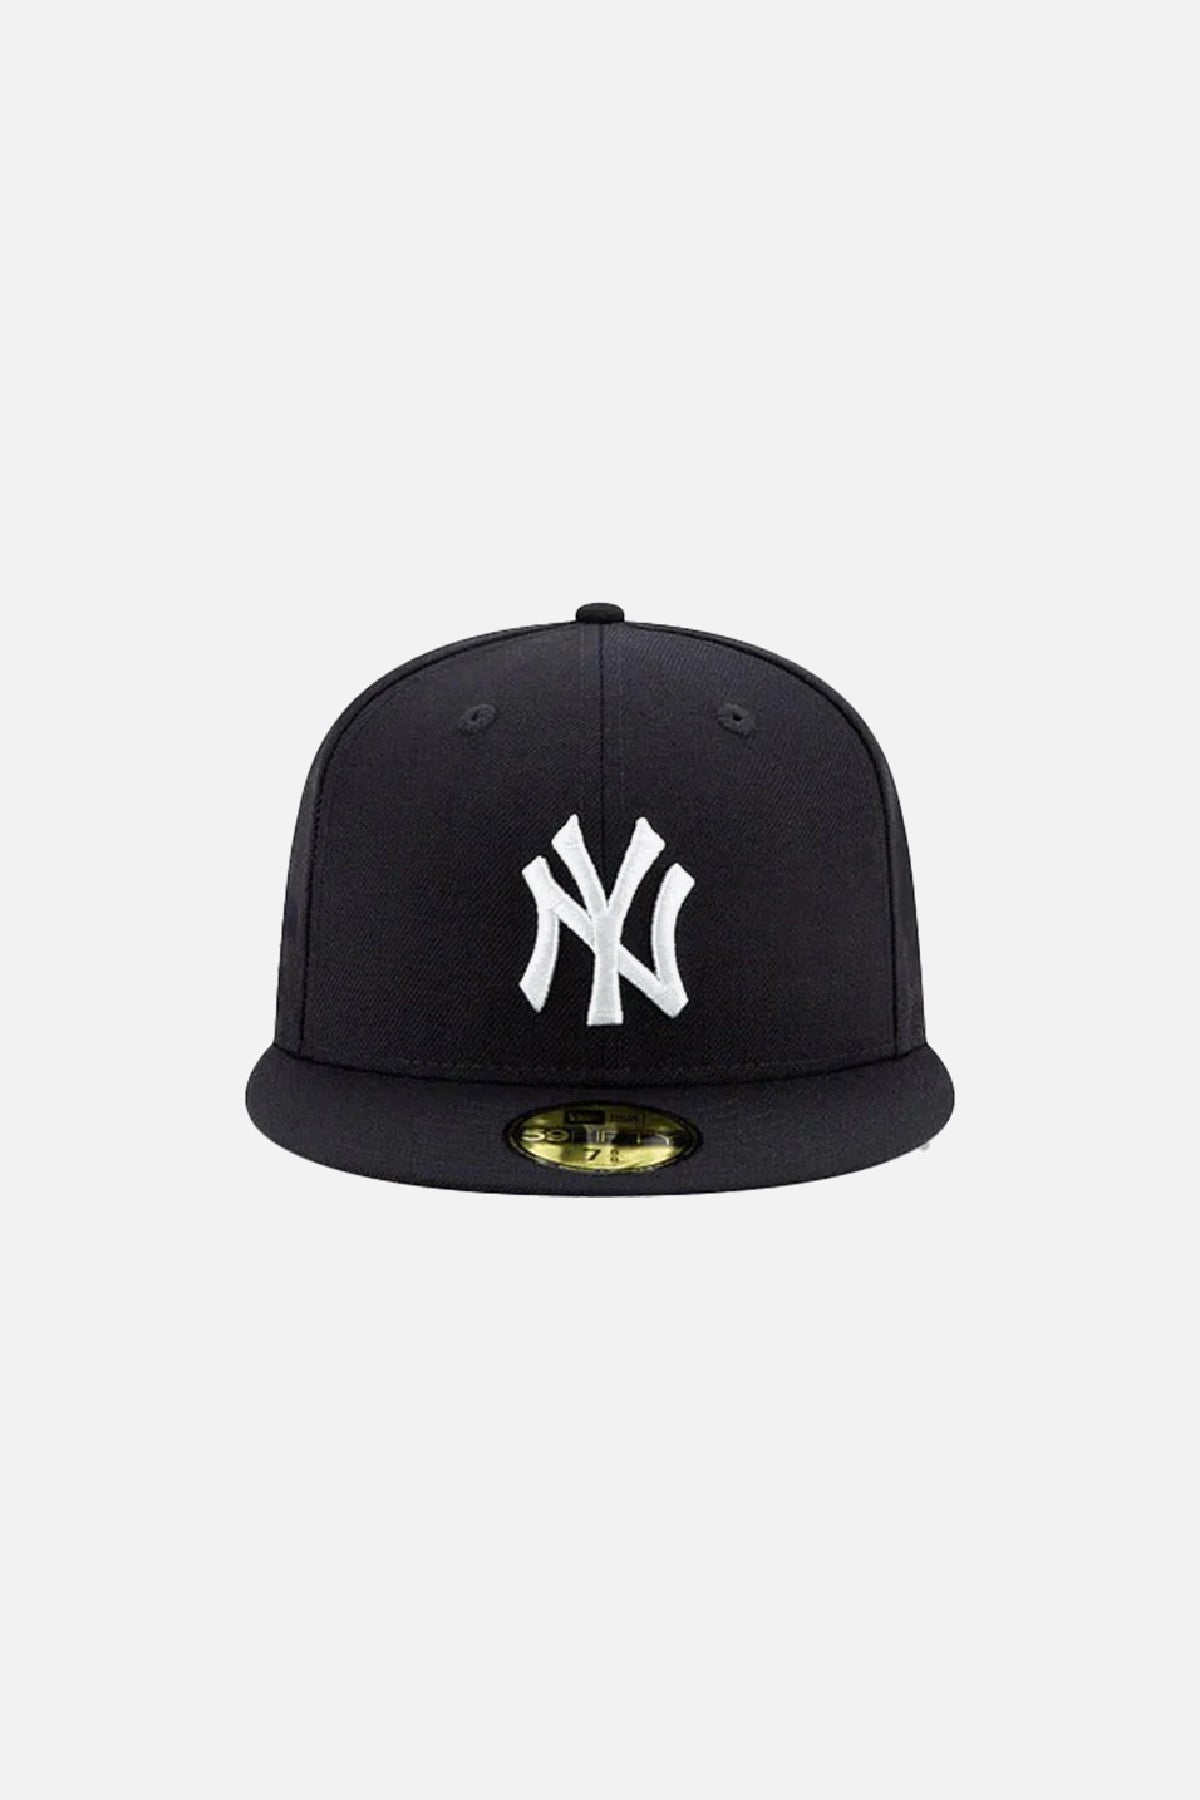 New York Yankees 2000 World Series Fitted